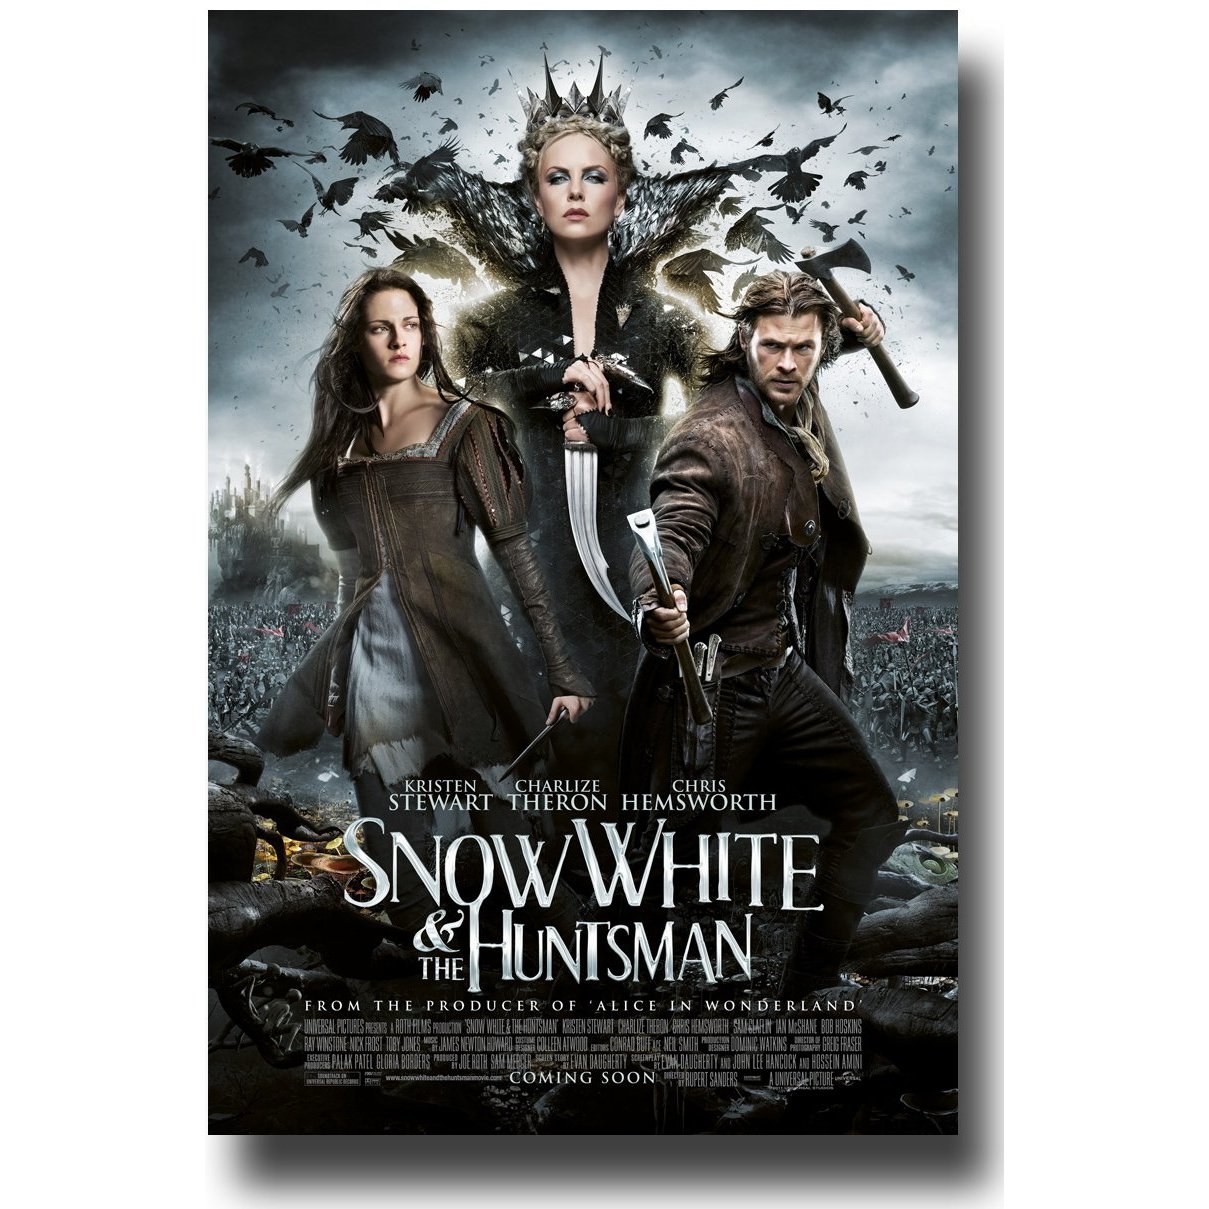 High Resolution Wallpaper | Snow White And The Huntsman 1209x1209 px